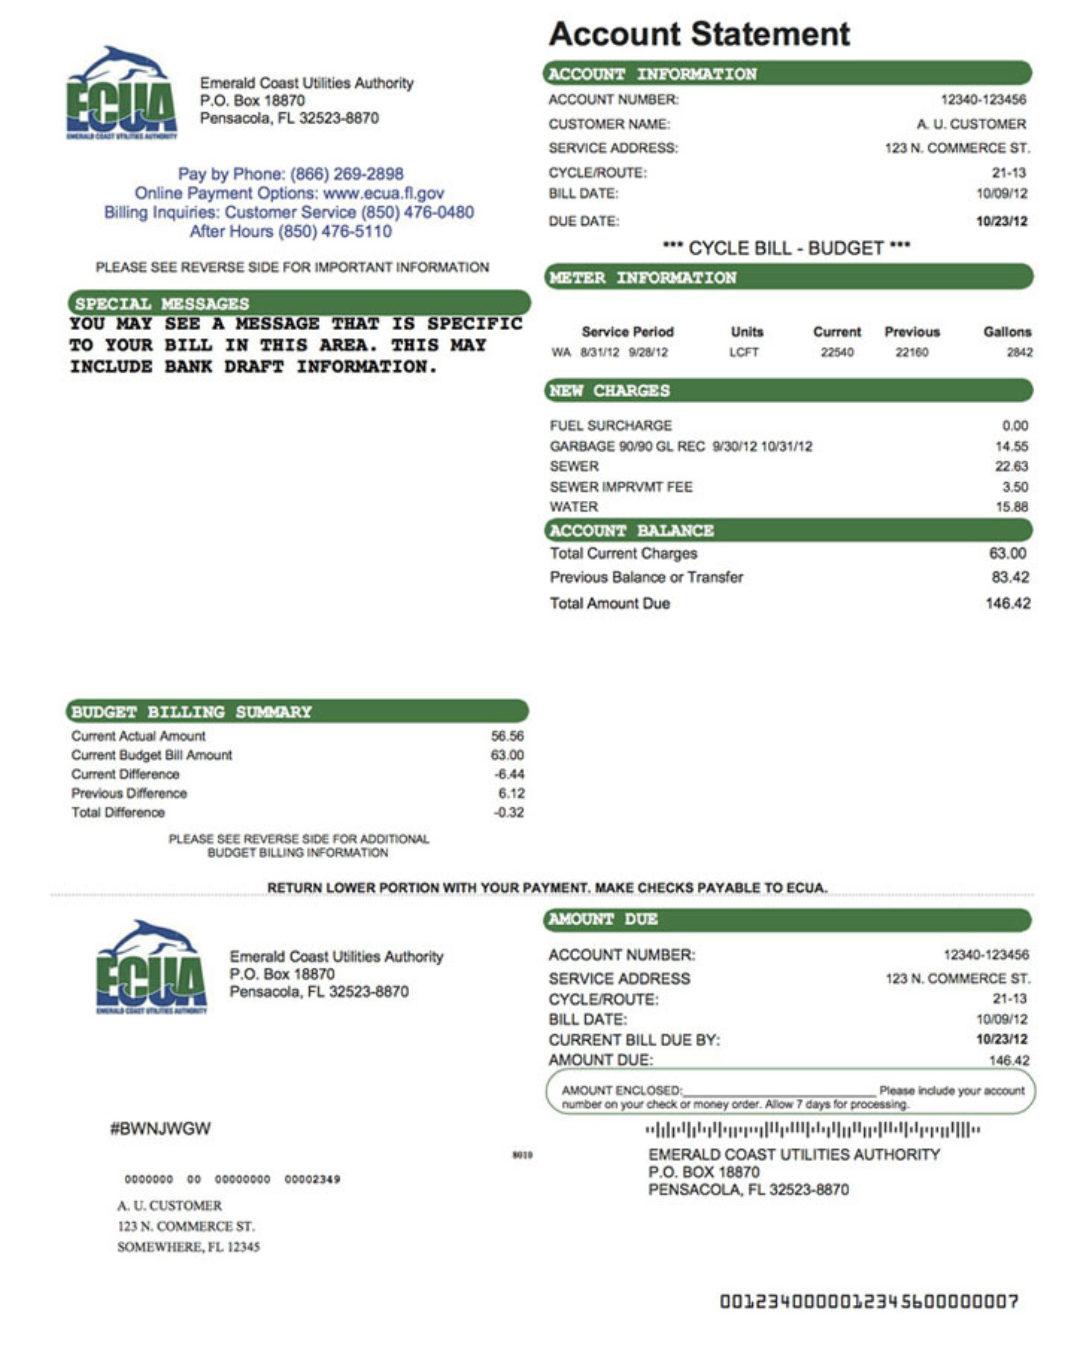 NorthEscambia.com ECUA Sewer Averaging Begins Today. Here’s What That Means For Your Bill.